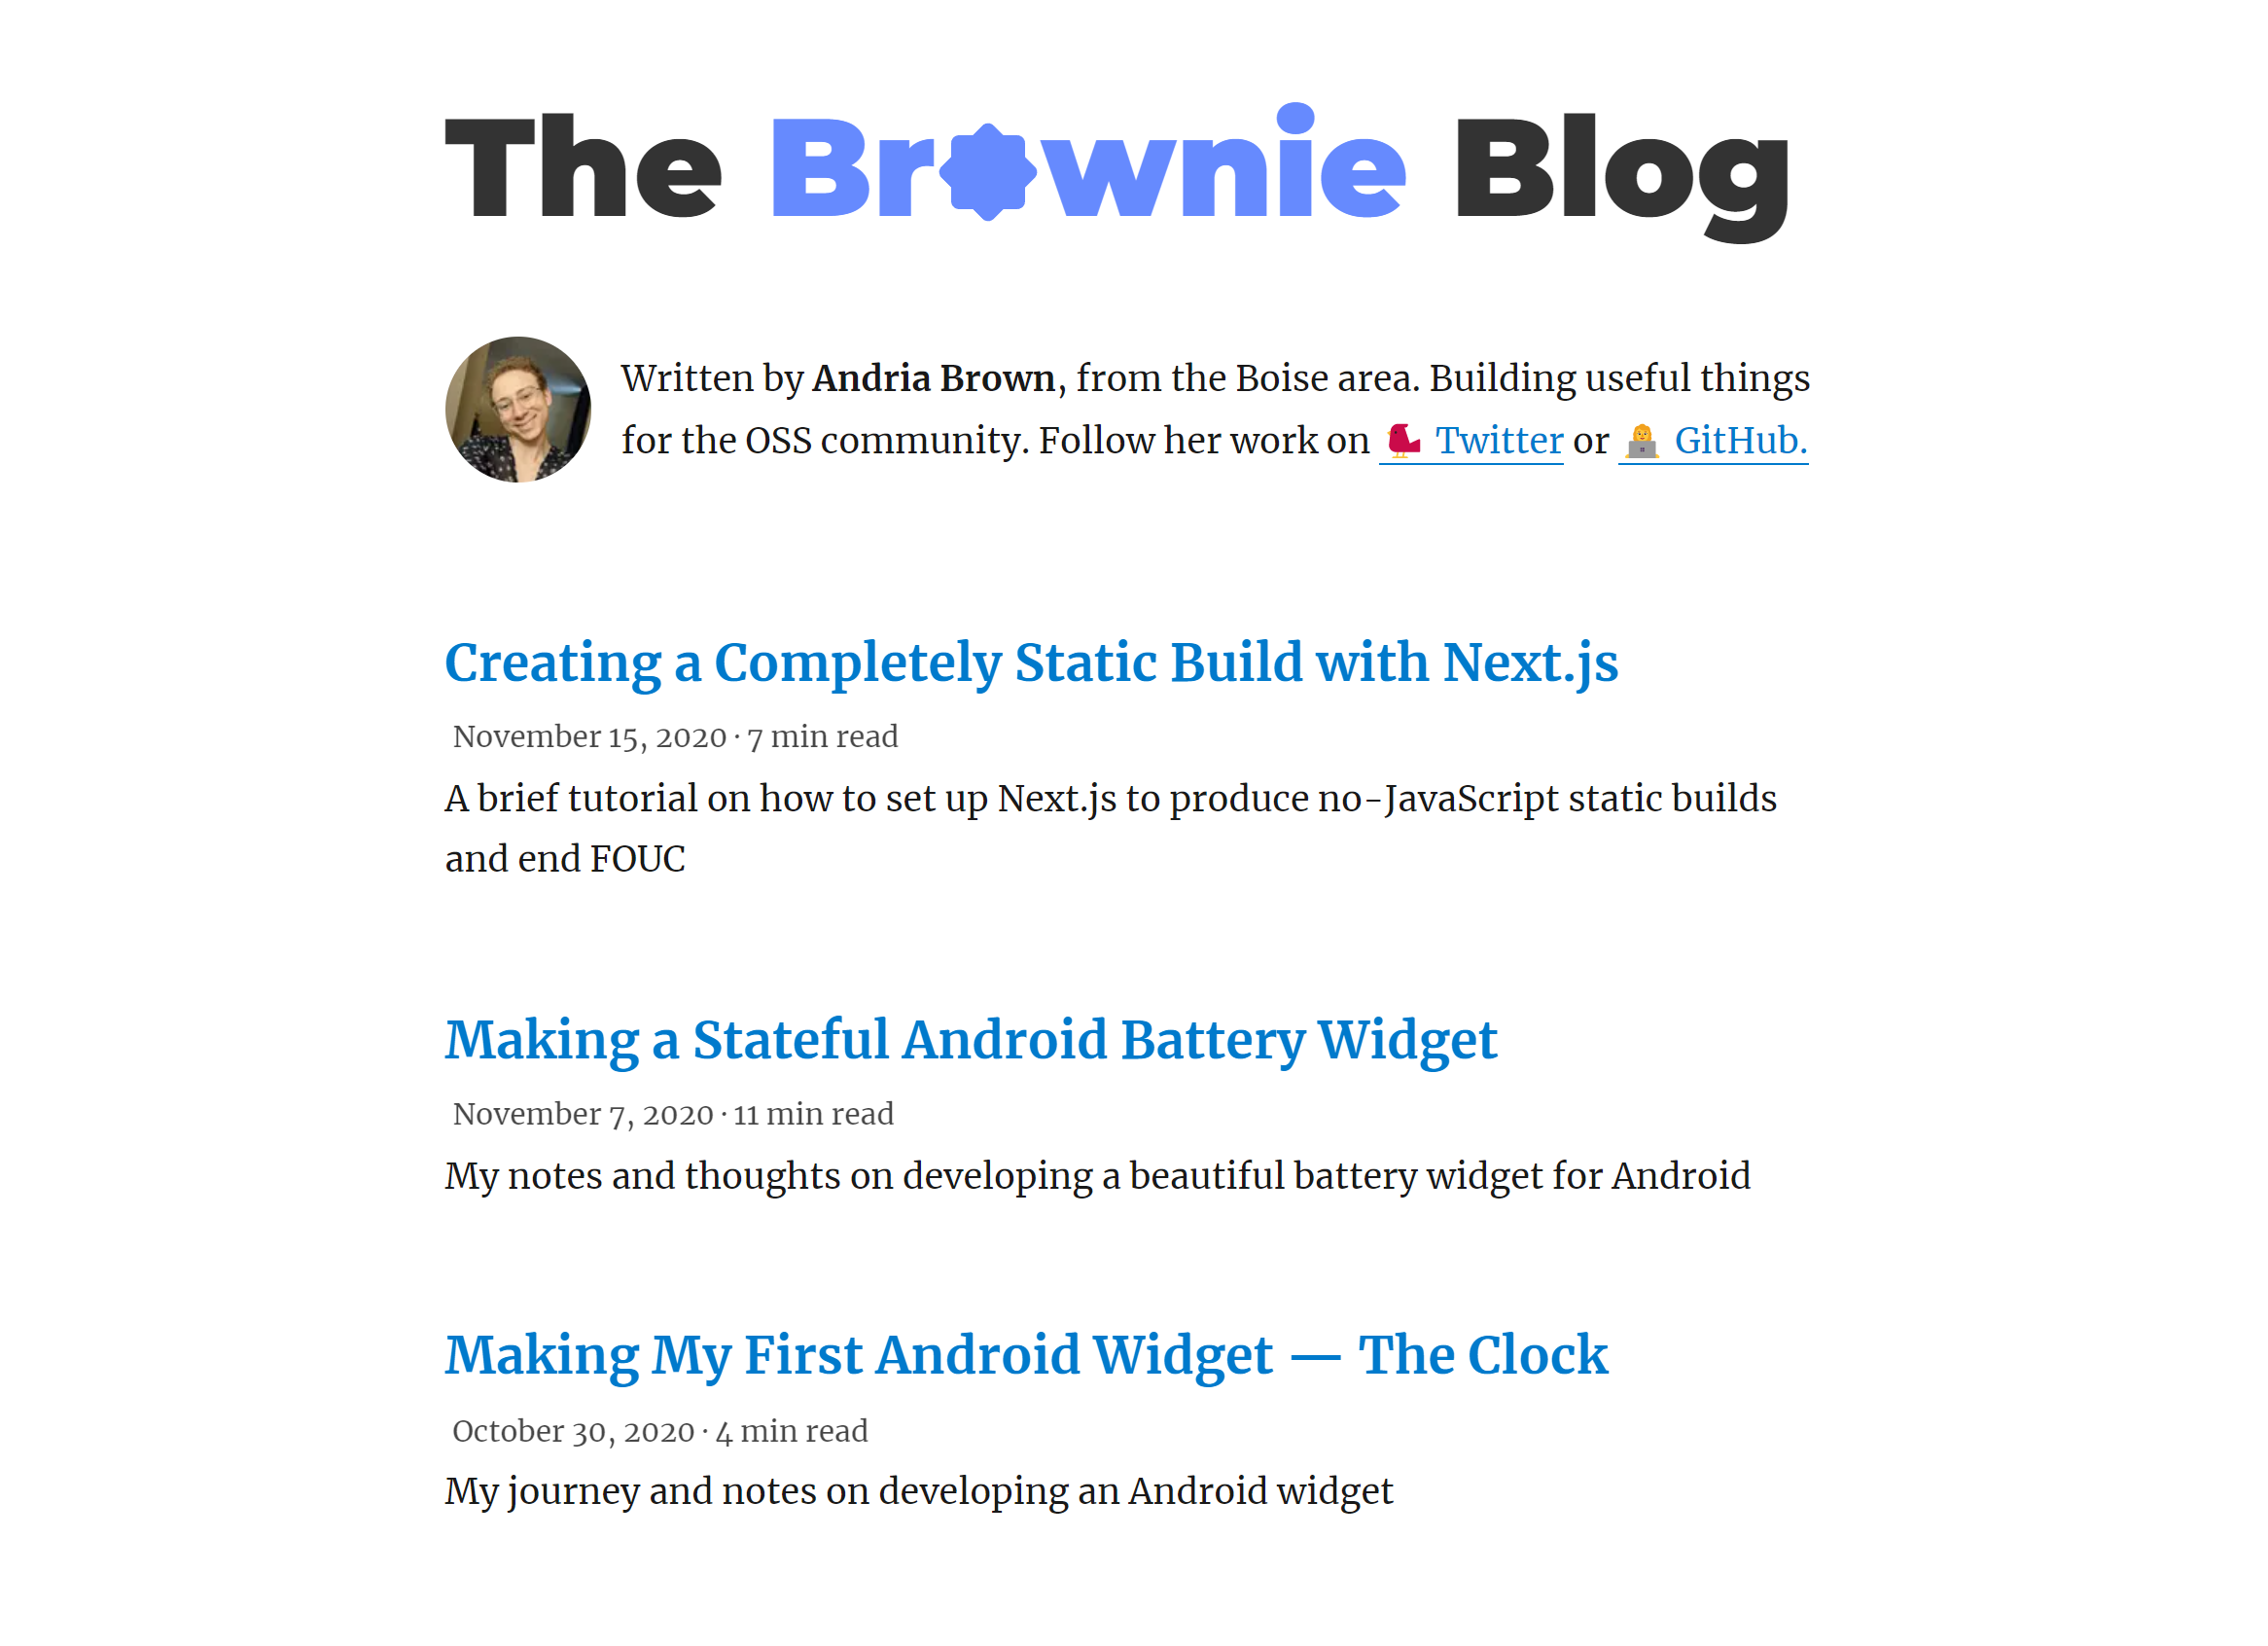 Home page of my developer blog. Contains a small about me section followed by multiple articles.